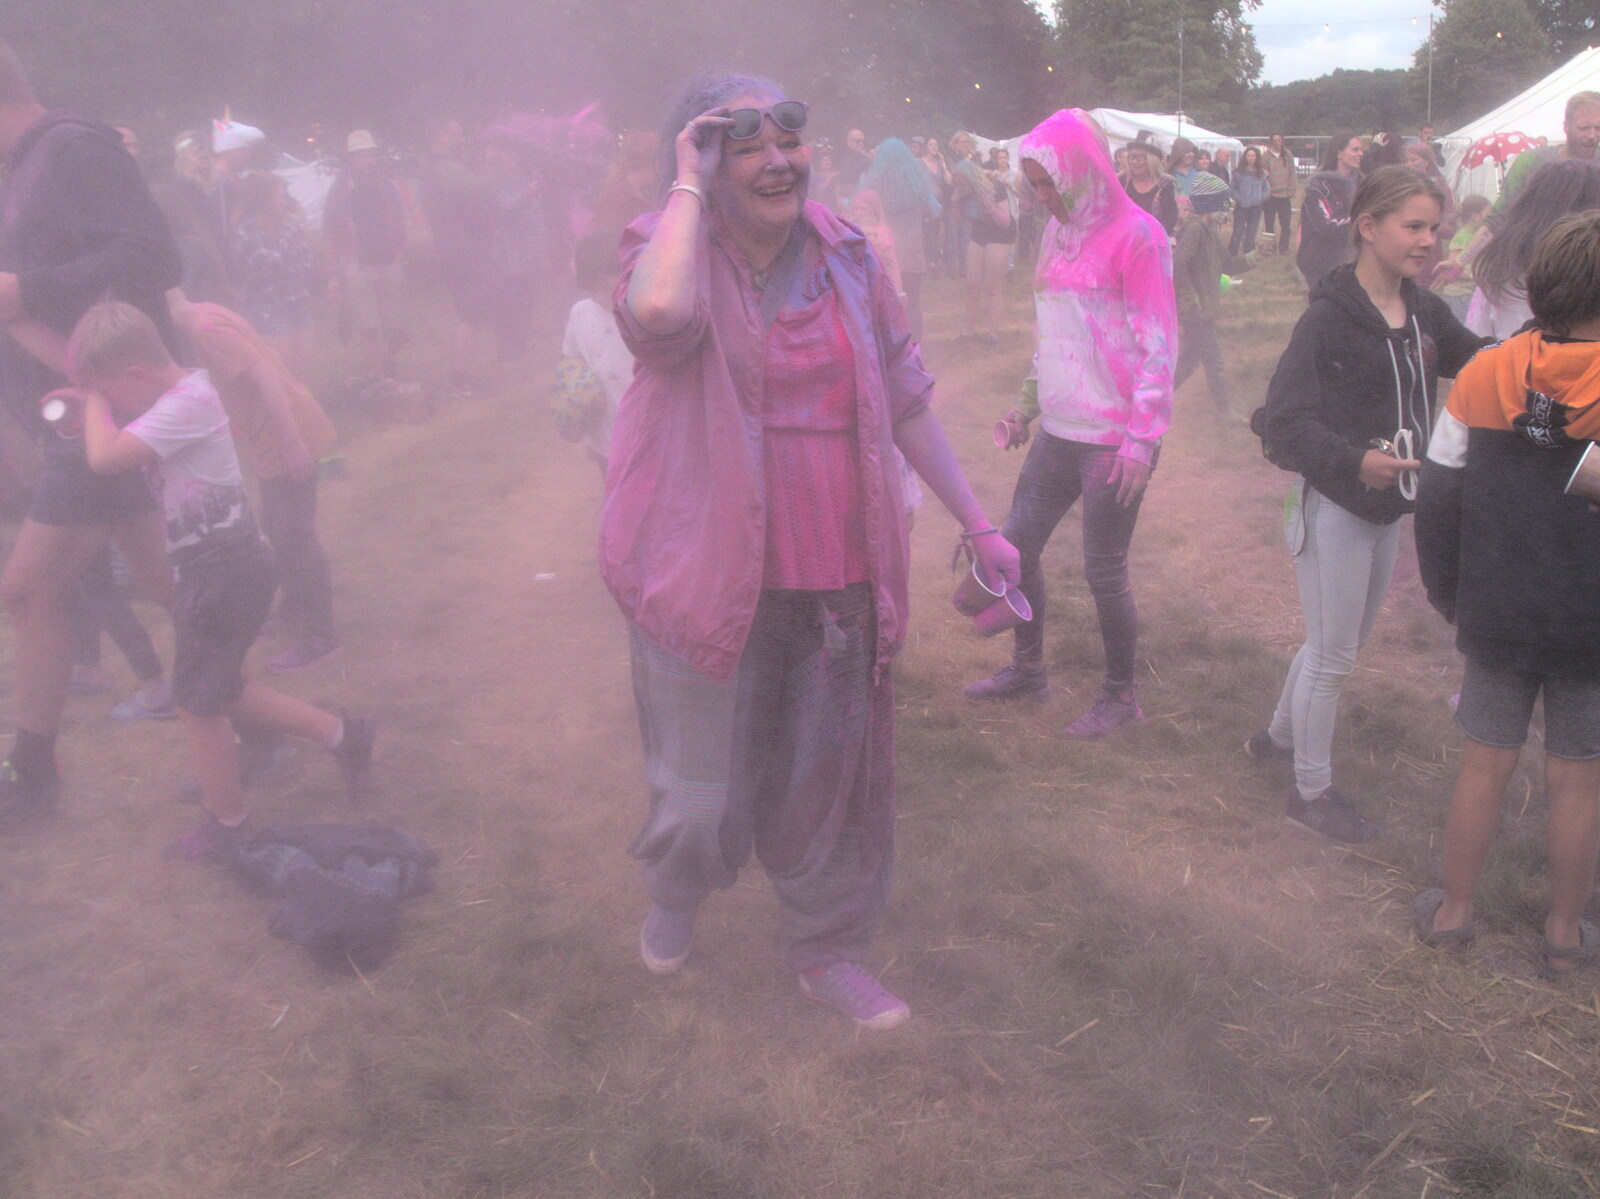 Emerging from the dust from Maui Waui Festival, Hill Farm, Gressenhall, Norfolk - 28th August 2021